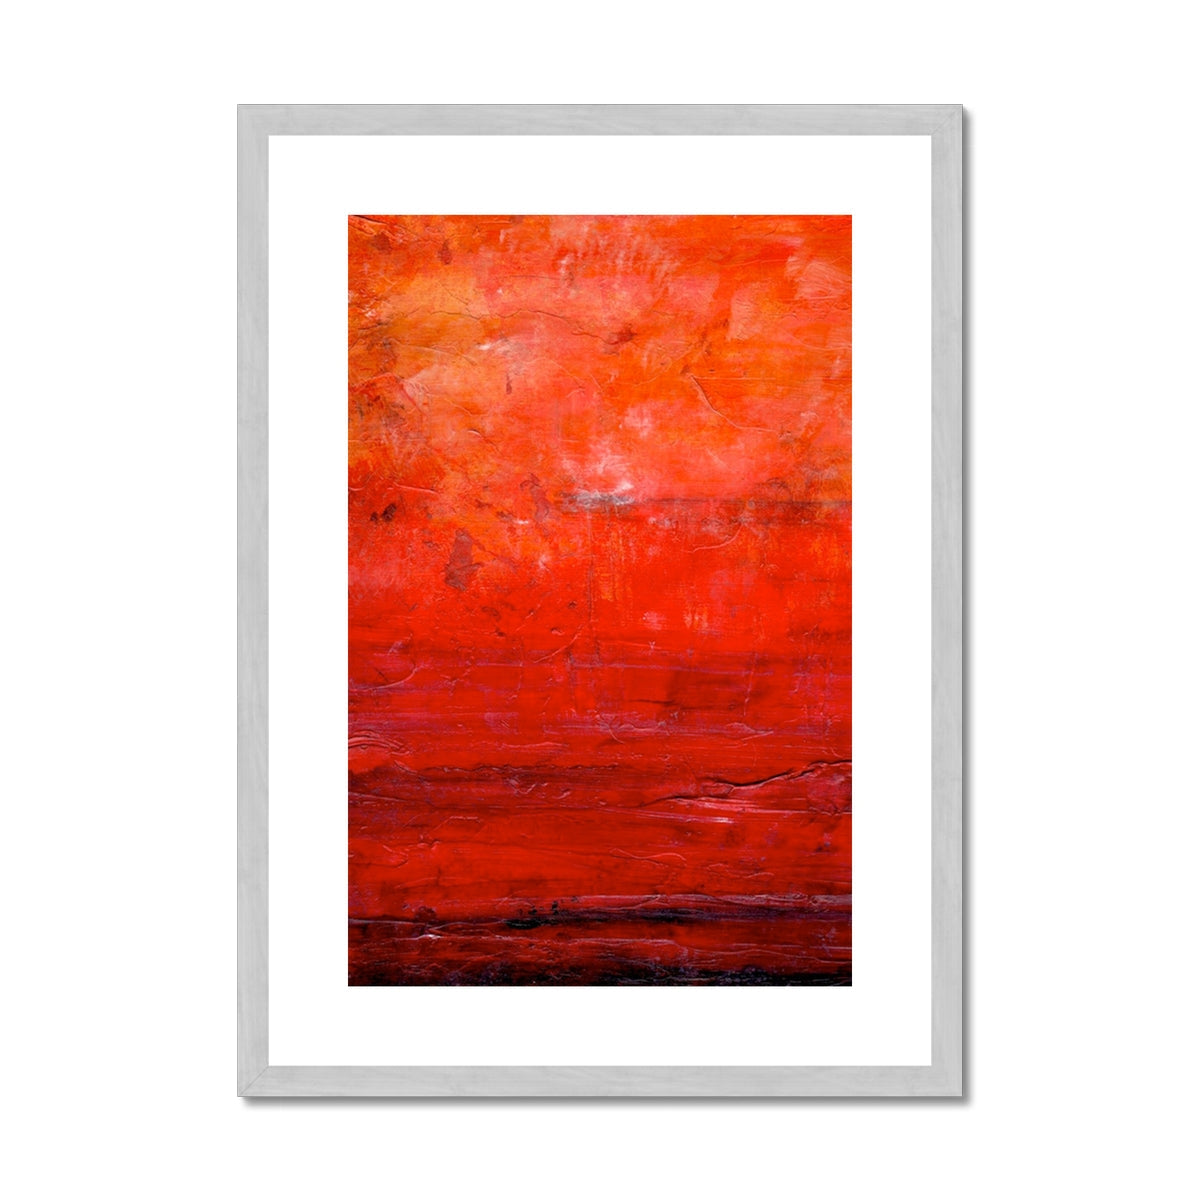 Abstract Summer Painting | Antique Framed & Mounted Prints From Scotland-Antique Framed & Mounted Prints-Abstract & Impressionistic Art Gallery-A2 Portrait-Silver Frame-Paintings, Prints, Homeware, Art Gifts From Scotland By Scottish Artist Kevin Hunter